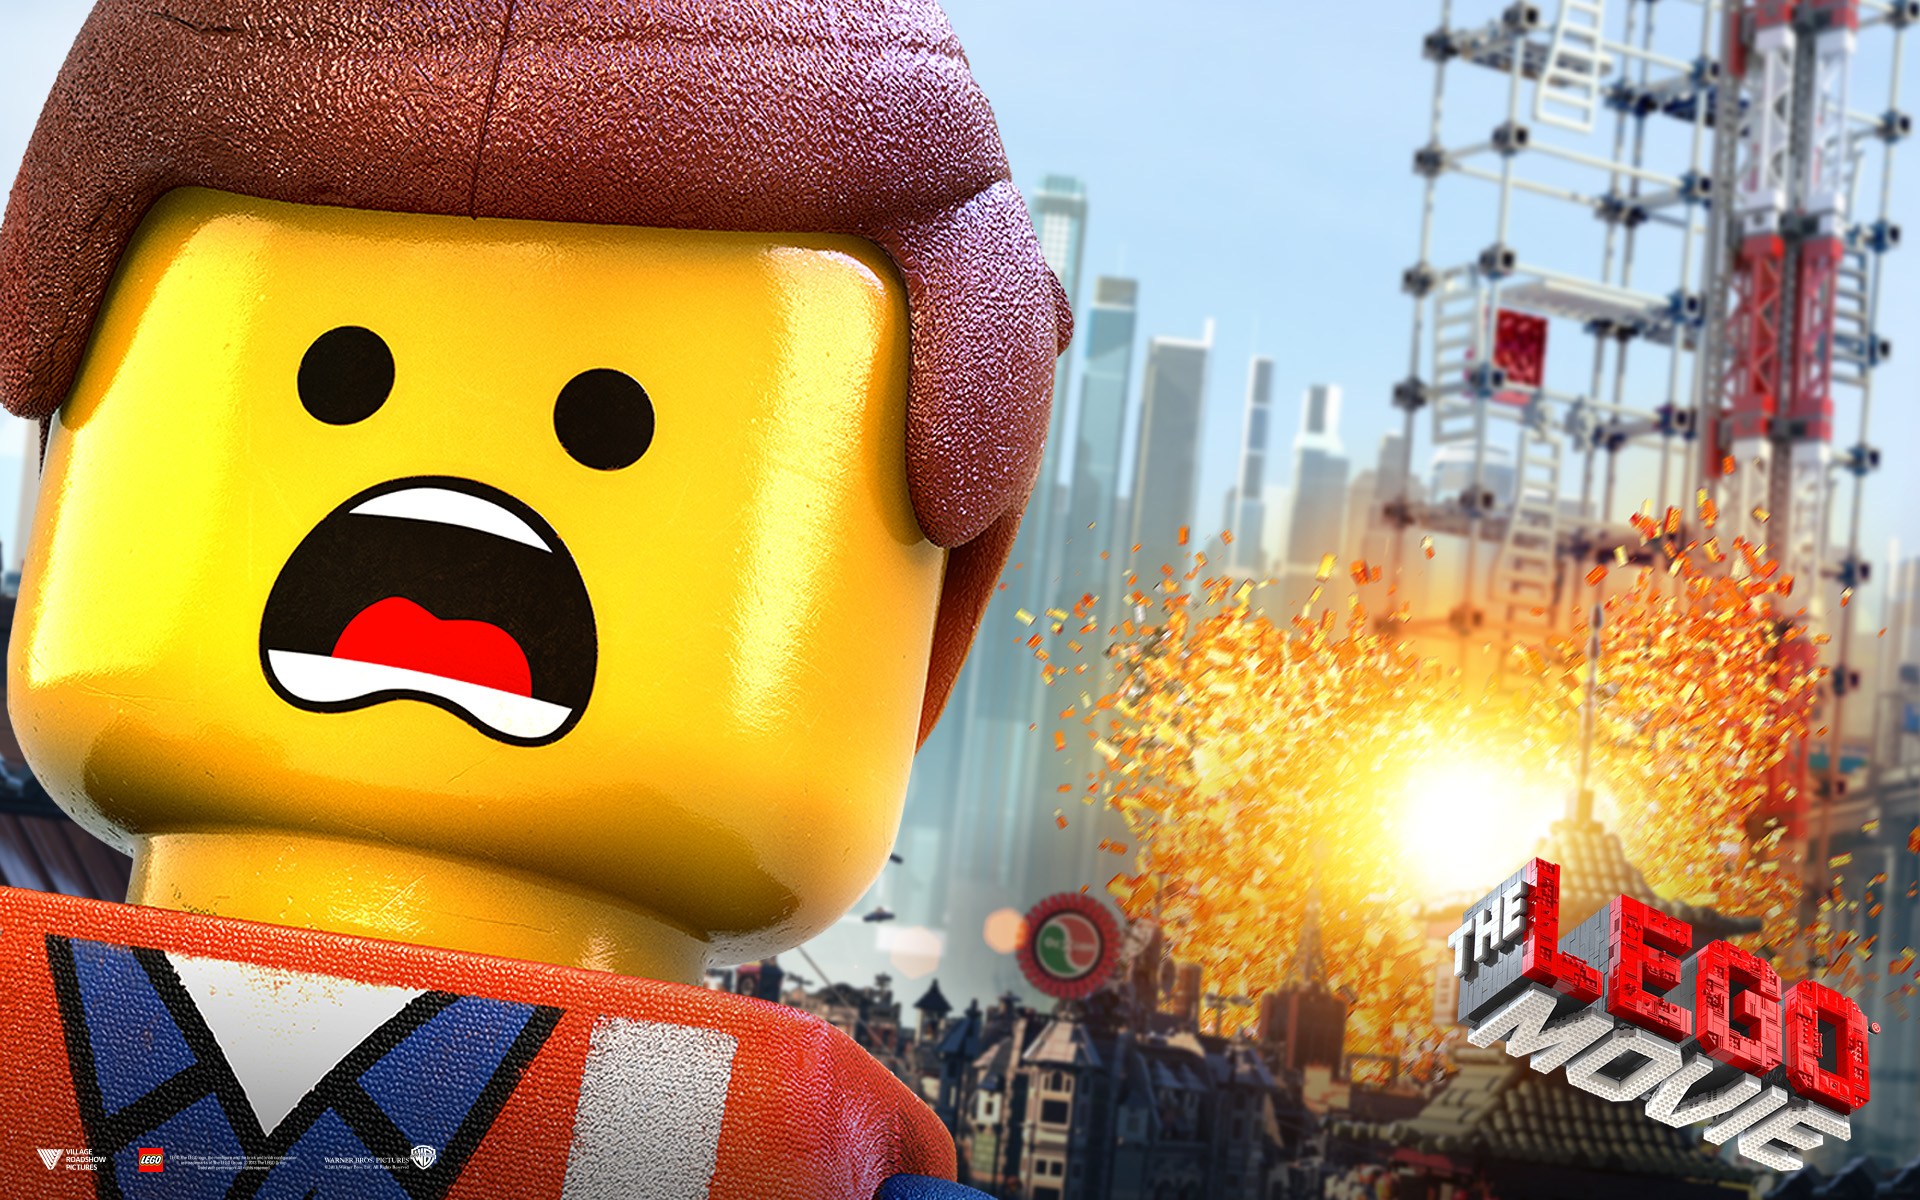 Movie The Lego Movie HD Wallpaper | Background Image